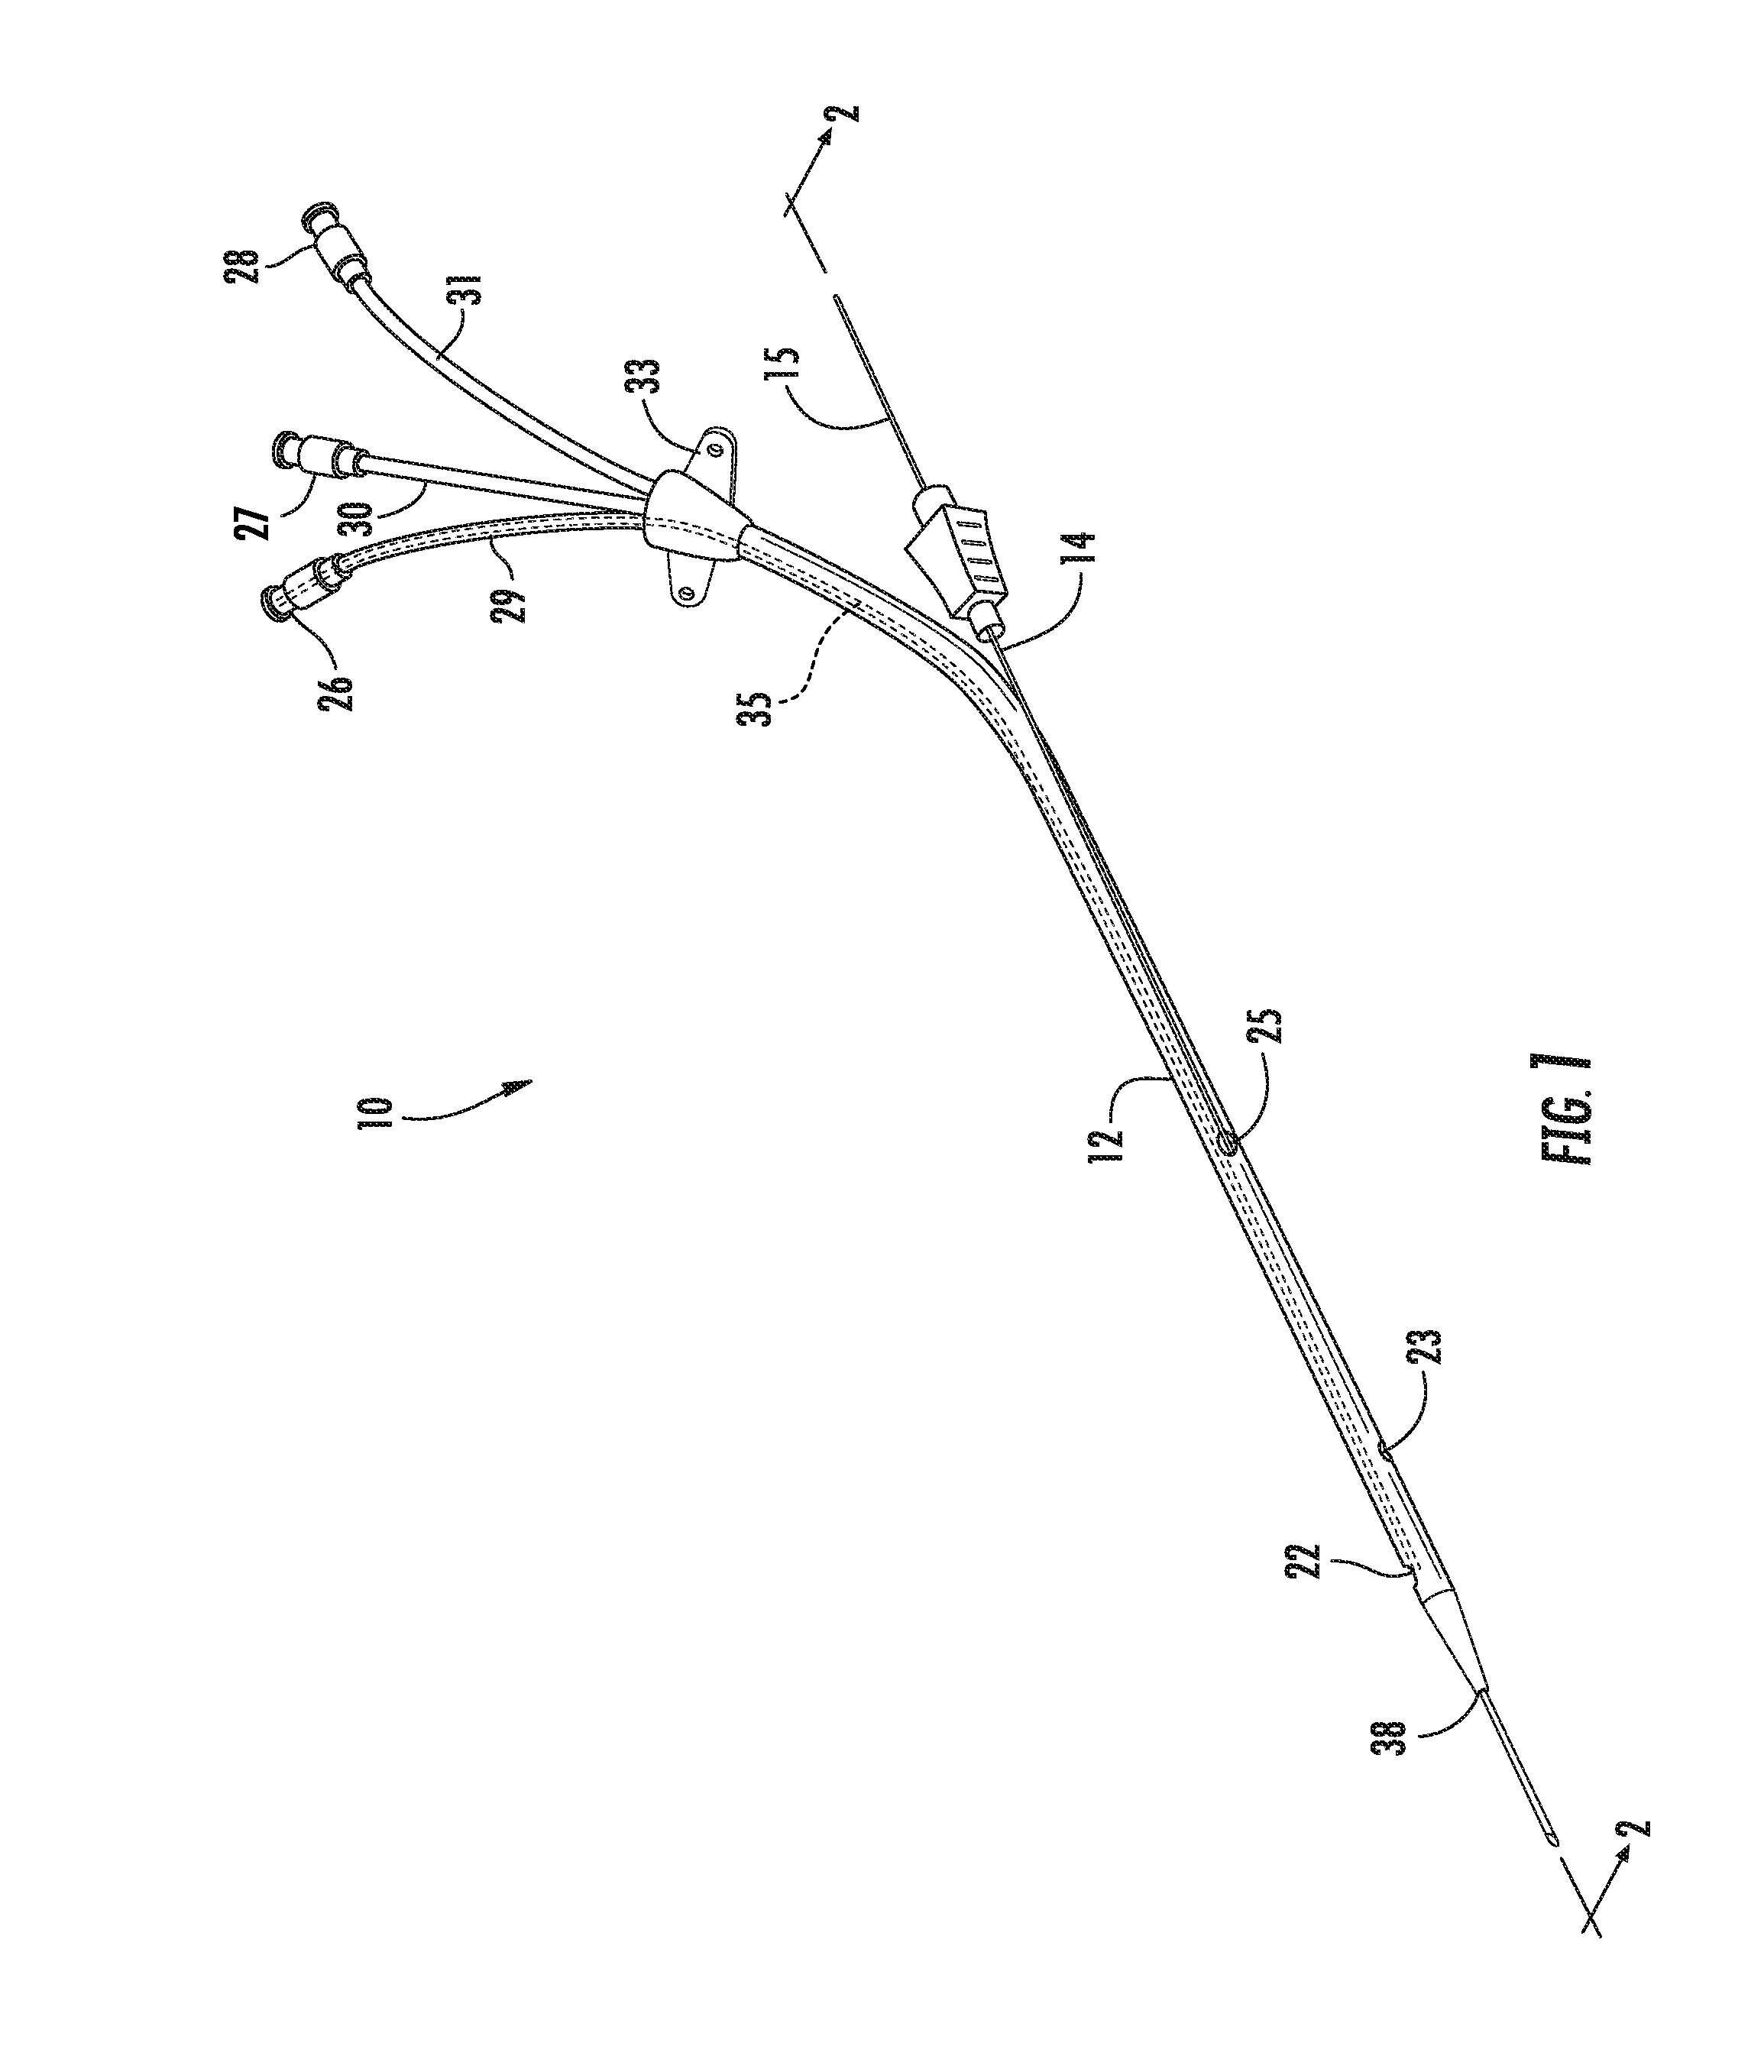 Rapid Insertion Integrated Catheter and Method of Using an Integrated Catheter